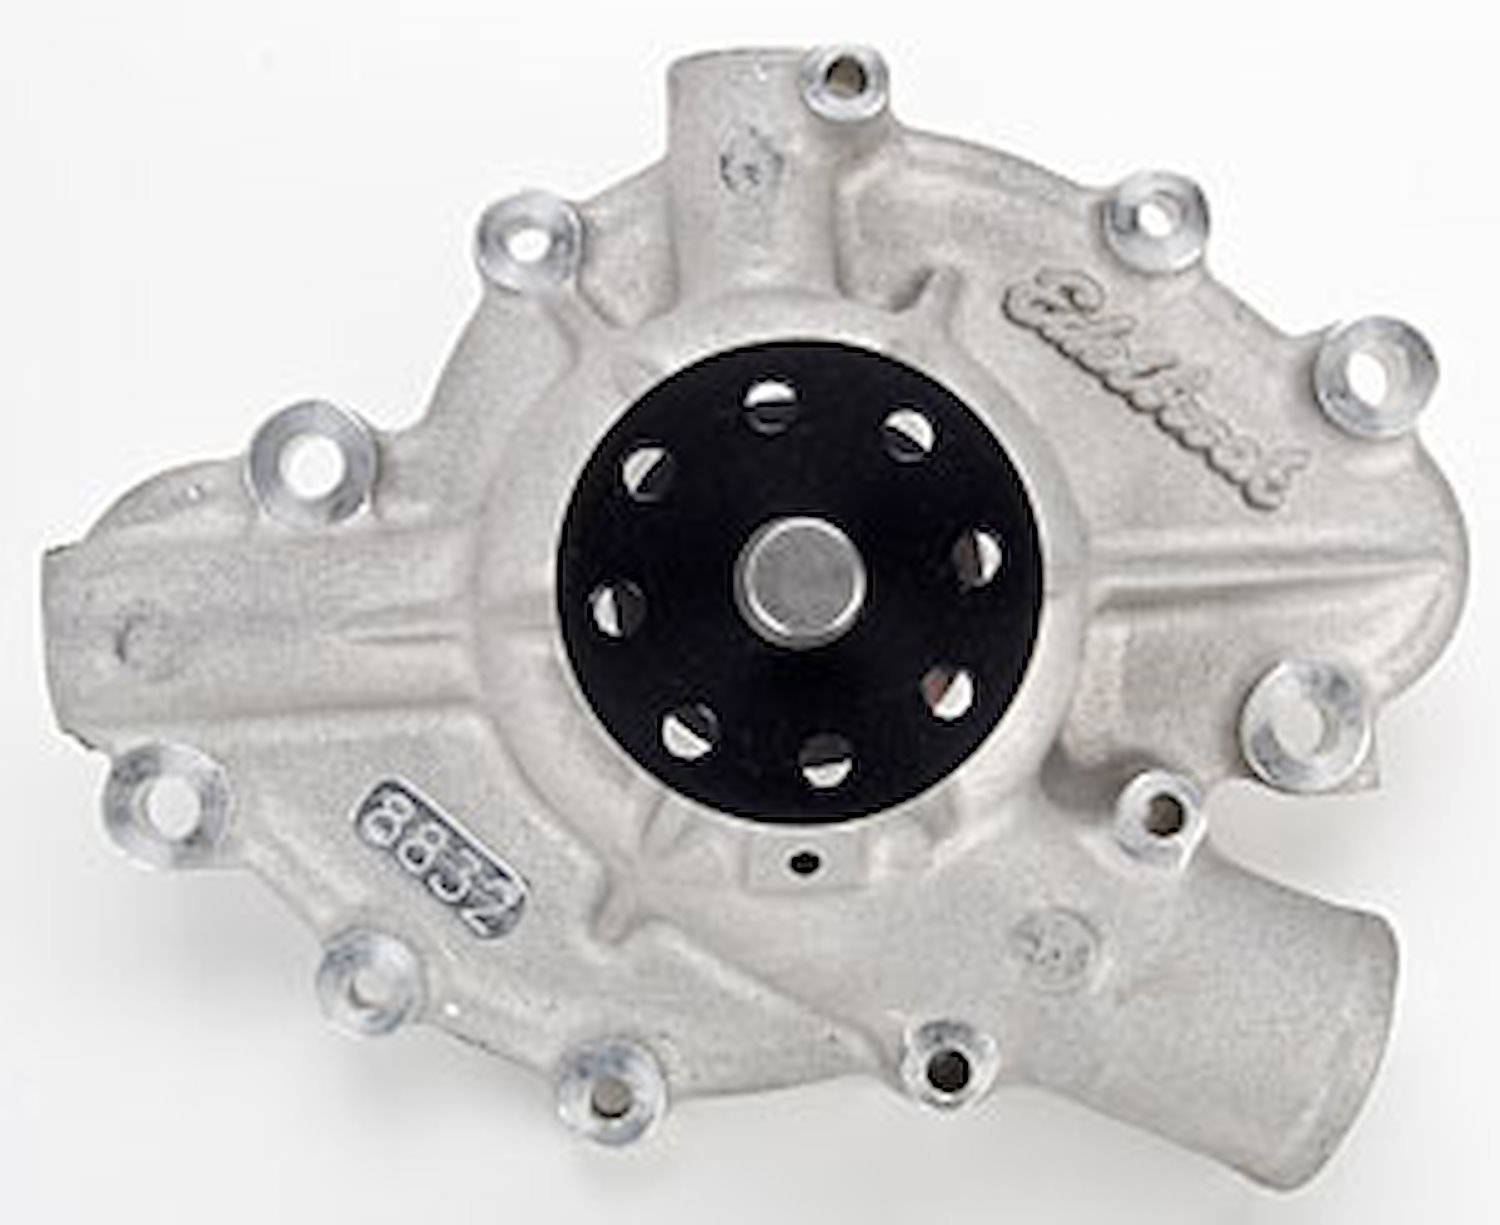 Victor Series Satin Aluminum Water Pump for 1973-1991 AMC/Jeep 304-360-401 with Long Style Pump